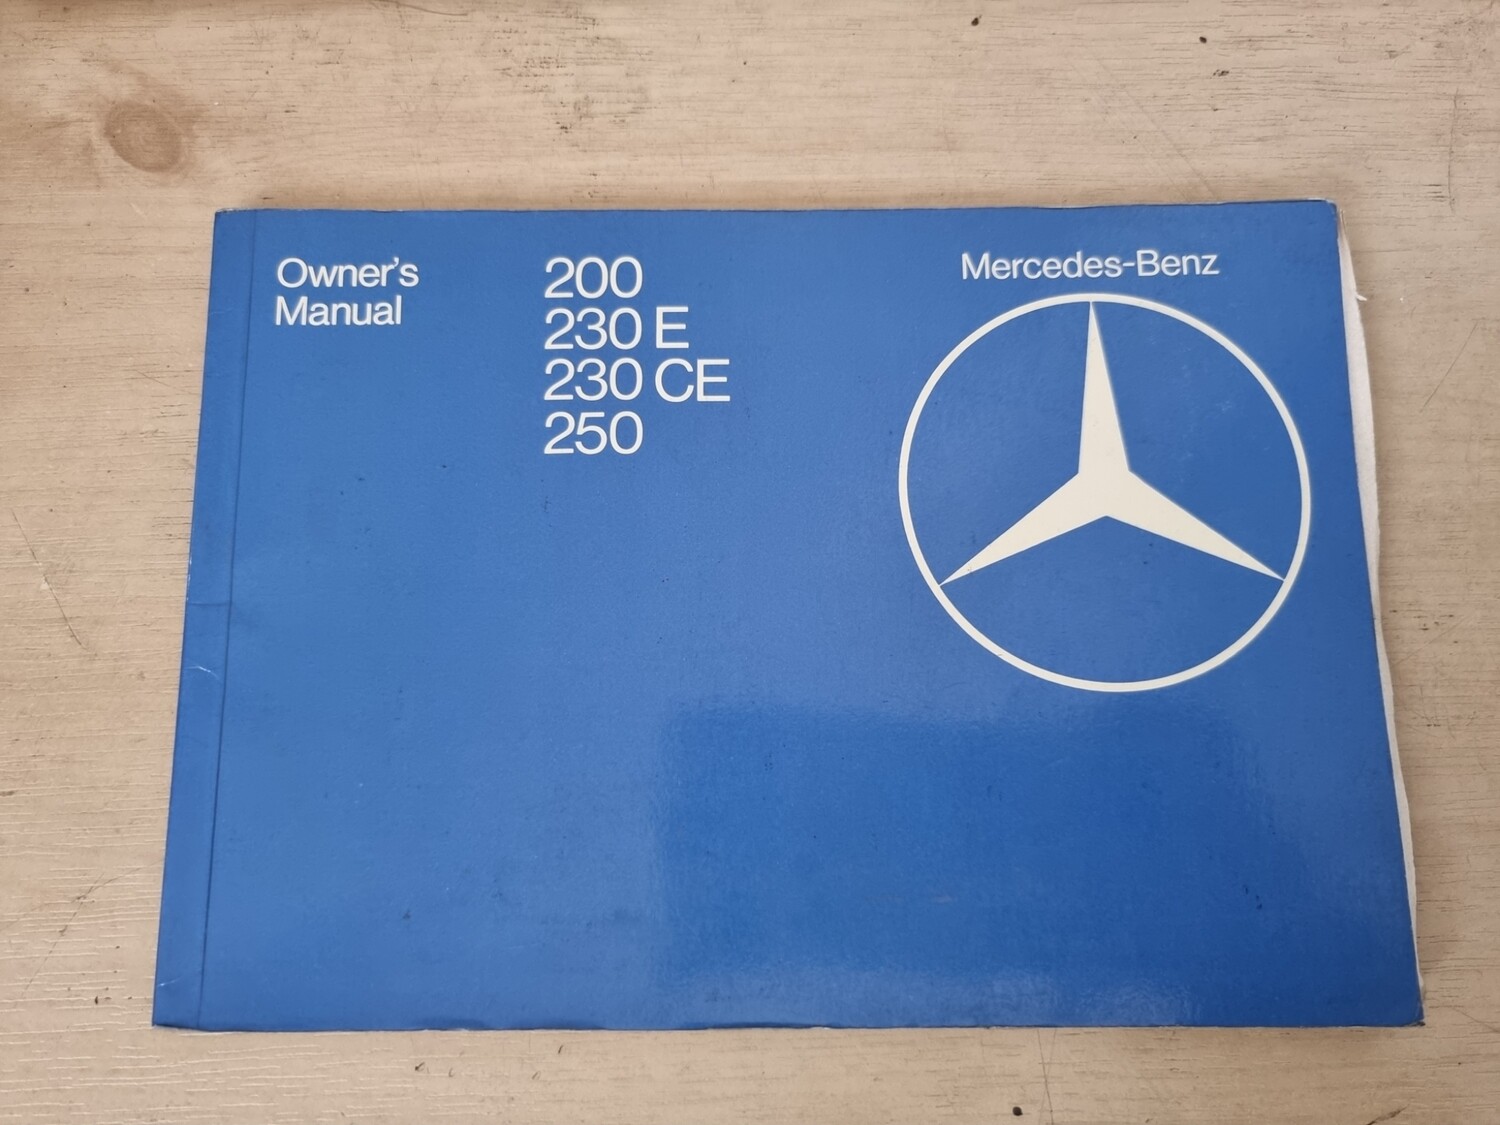 Mercedes-Benz Owner's Manual (W123)